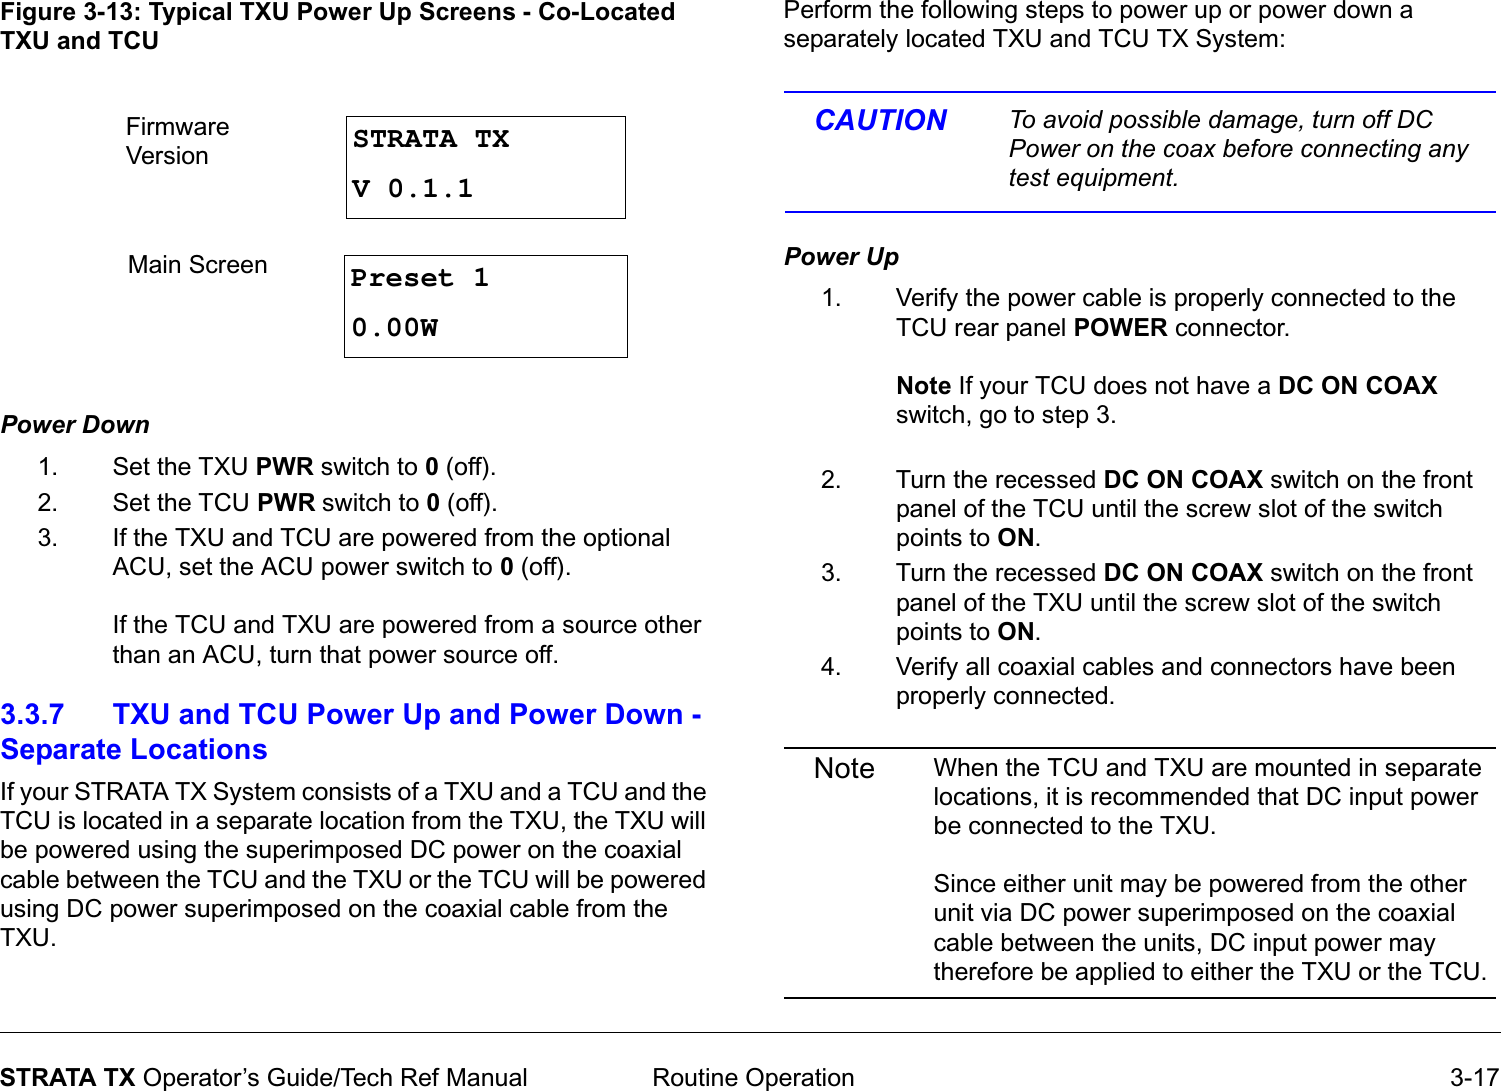  Routine Operation 3-17STRATA TX Operator’s Guide/Tech Ref ManualFigure 3-13: Typical TXU Power Up Screens - Co-Located TXU and TCUPower Down  1. Set the TXU PWR switch to 0 (off).2. Set the TCU PWR switch to 0 (off).3. If the TXU and TCU are powered from the optional ACU, set the ACU power switch to 0 (off).  If the TCU and TXU are powered from a source other than an ACU, turn that power source off.3.3.7 TXU and TCU Power Up and Power Down - Separate LocationsIf your STRATA TX System consists of a TXU and a TCU and the TCU is located in a separate location from the TXU, the TXU will be powered using the superimposed DC power on the coaxial cable between the TCU and the TXU or the TCU will be powered using DC power superimposed on the coaxial cable from the TXU. STRATA TXV 0.1.1Preset 10.00WFirmware VersionMain Screen Perform the following steps to power up or power down a separately located TXU and TCU TX System:CAUTION To avoid possible damage, turn off DC Power on the coax before connecting any test equipment.Power Up  1. Verify the power cable is properly connected to the TCU rear panel POWER connector.  Note If your TCU does not have a DC ON COAX switch, go to step 3. 2. Turn the recessed DC ON COAX switch on the front panel of the TCU until the screw slot of the switch points to ON.3. Turn the recessed DC ON COAX switch on the front panel of the TXU until the screw slot of the switch points to ON.4. Verify all coaxial cables and connectors have been properly connected.Note When the TCU and TXU are mounted in separate locations, it is recommended that DC input power be connected to the TXU.   Since either unit may be powered from the other unit via DC power superimposed on the coaxial cable between the units, DC input power may therefore be applied to either the TXU or the TCU.